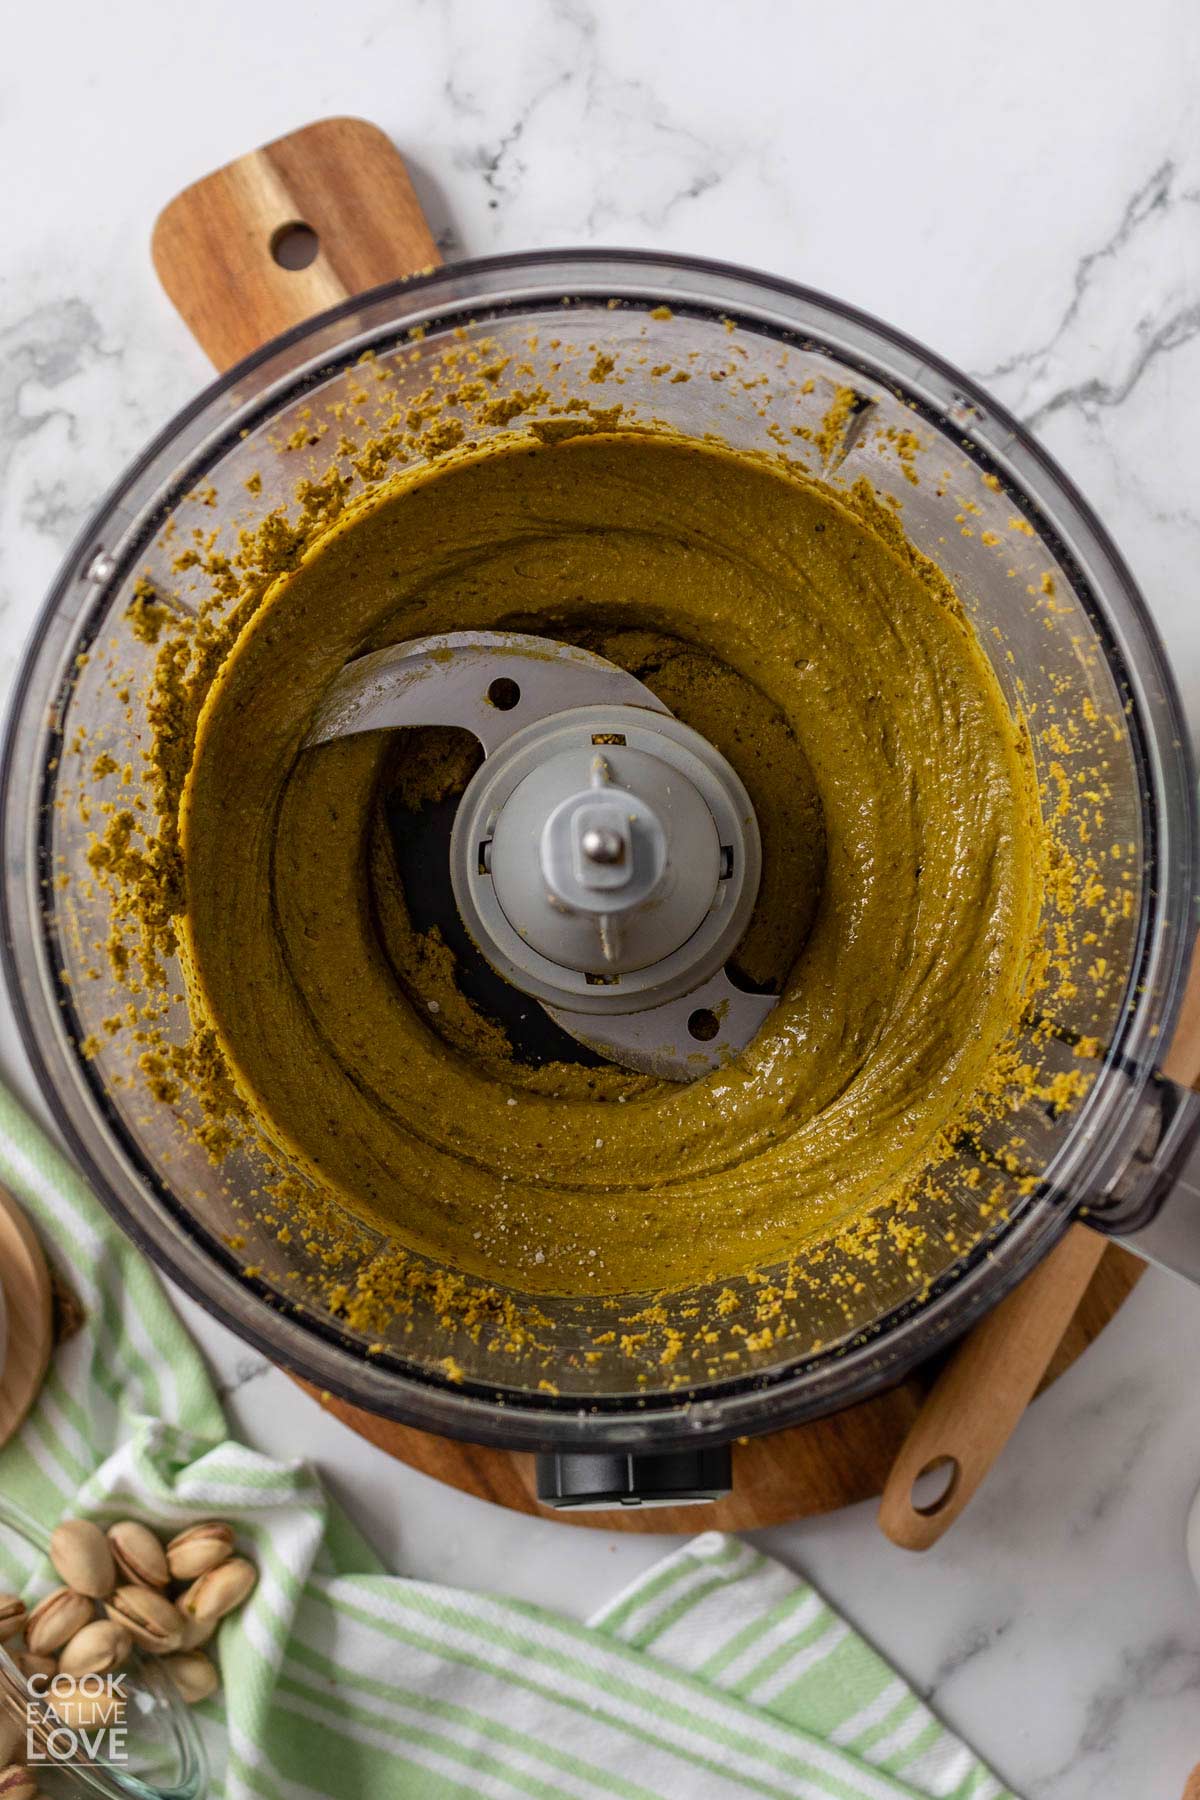 Fully blended pistachio butter in the food processor bowl.